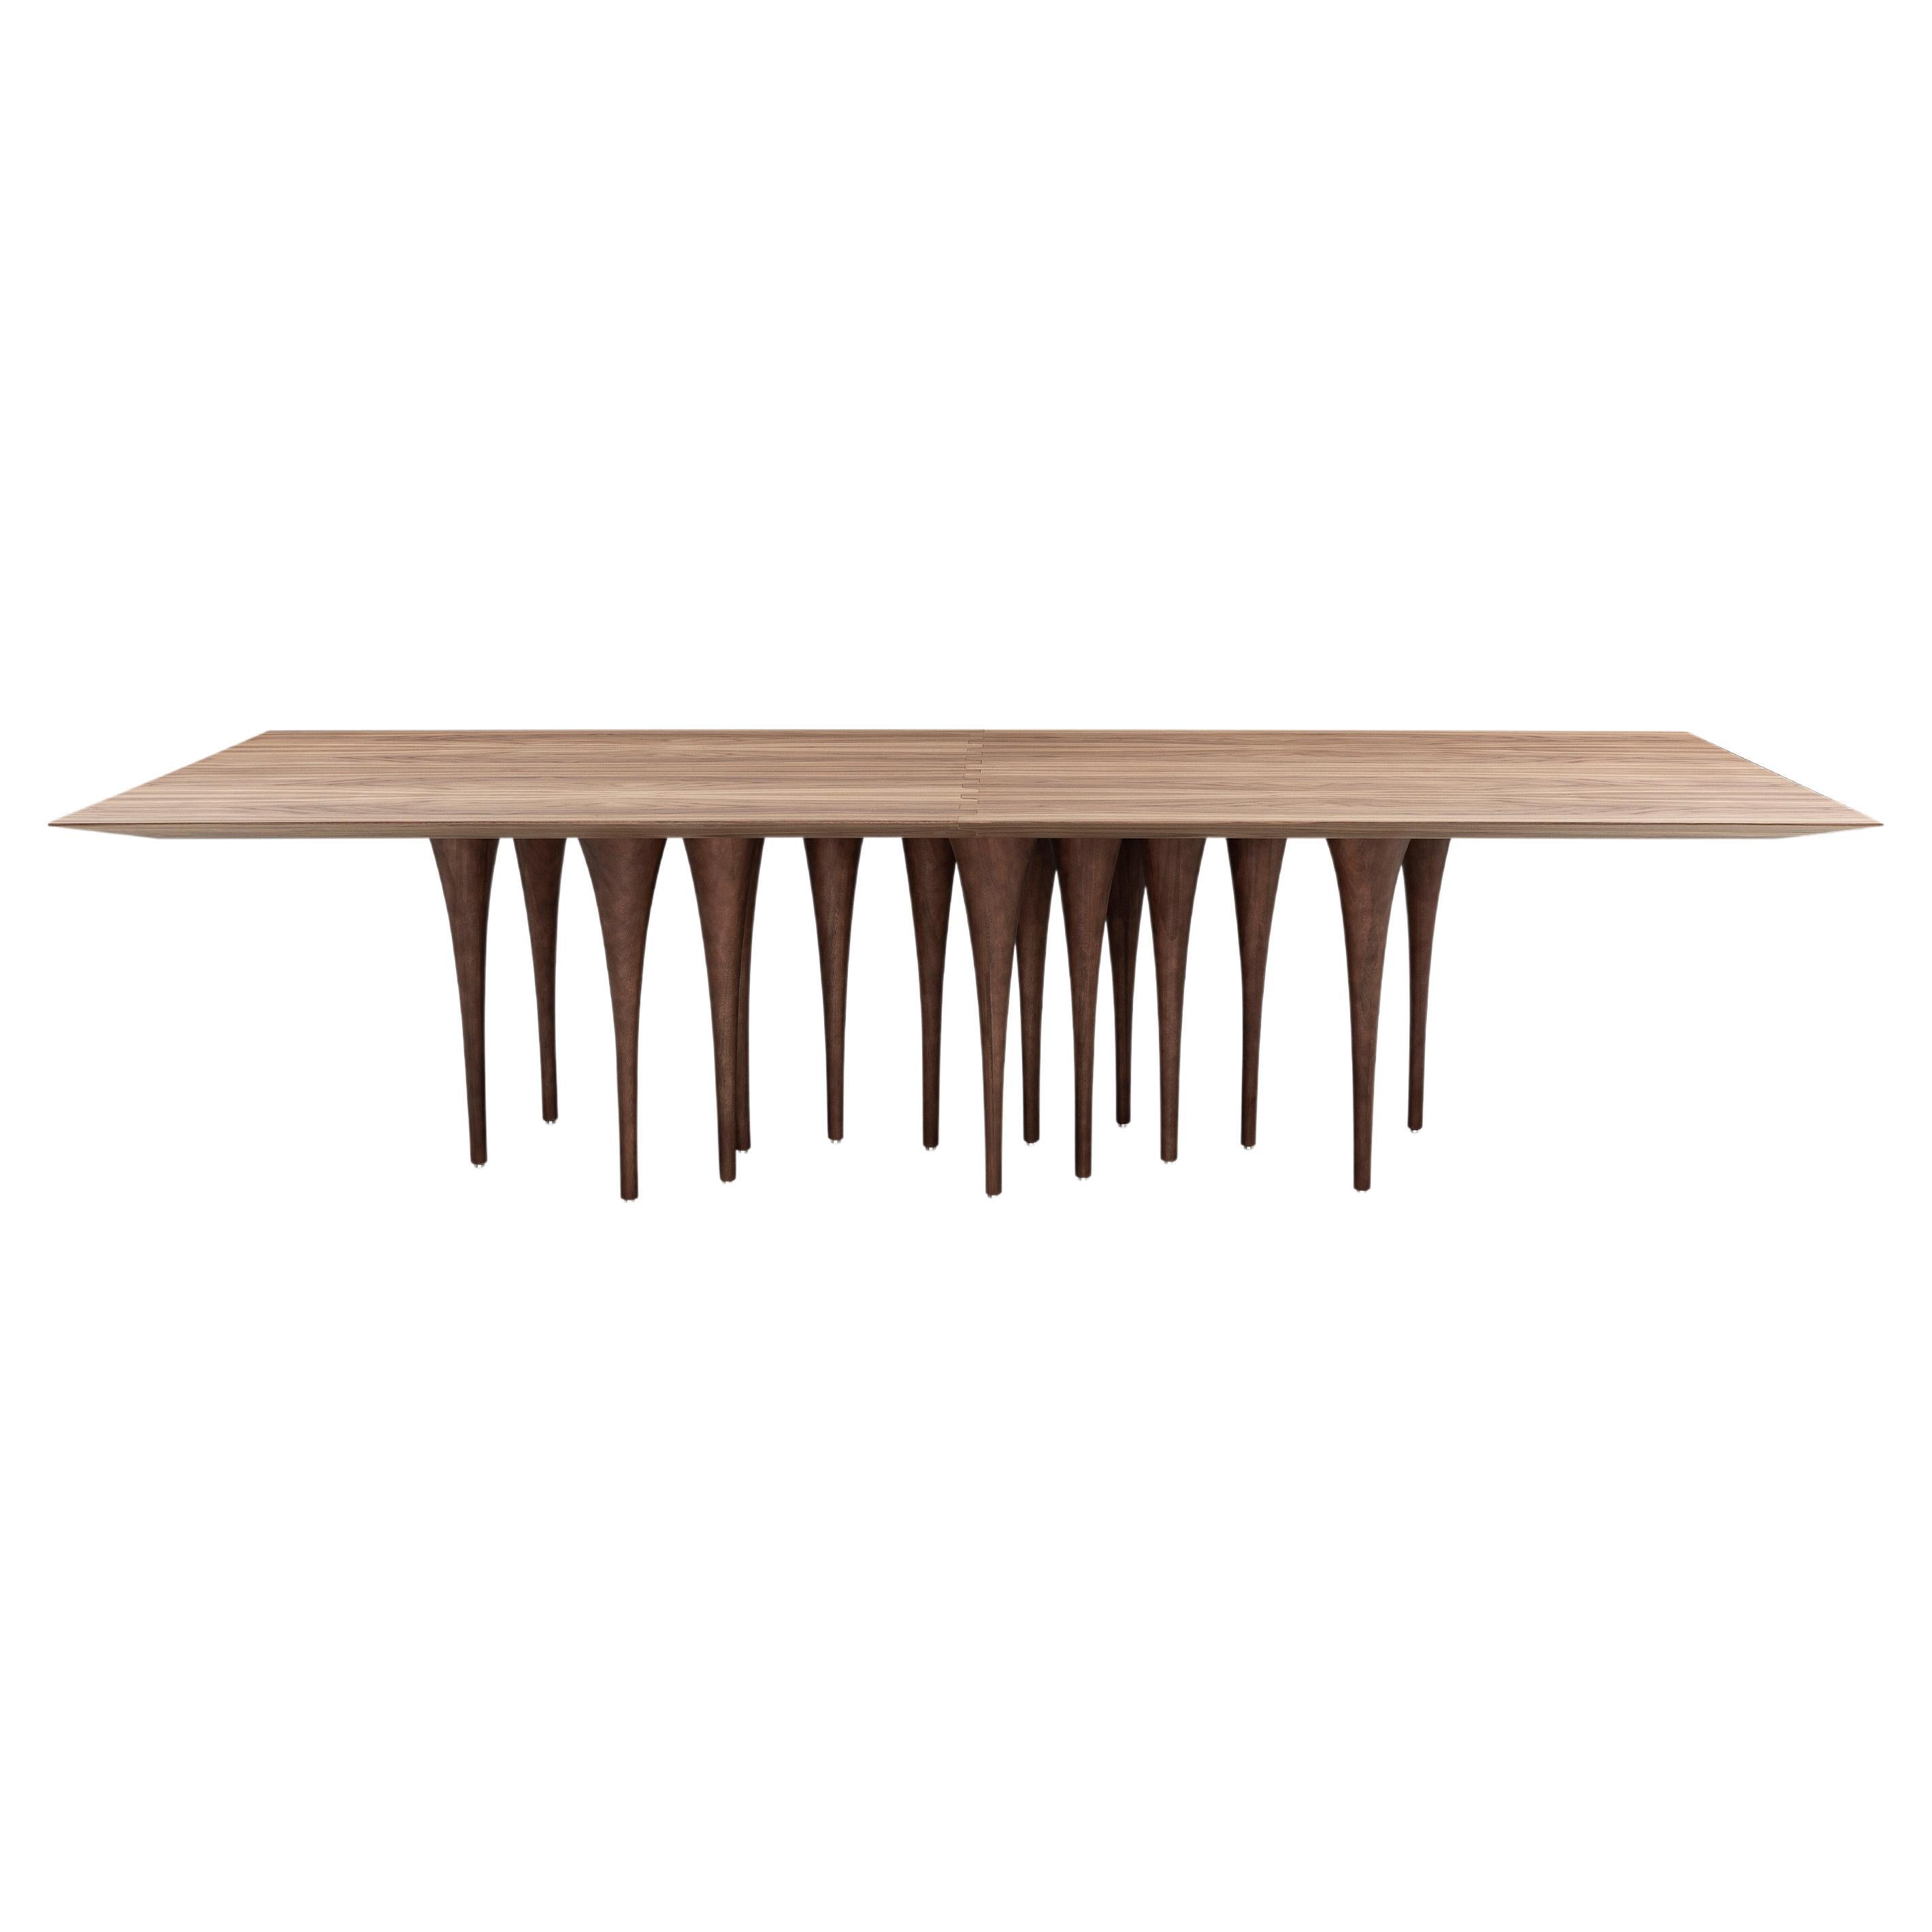 Pin Dining Table with a Walnut Wood Veneered Table Top and 16 Legs 118'' For Sale